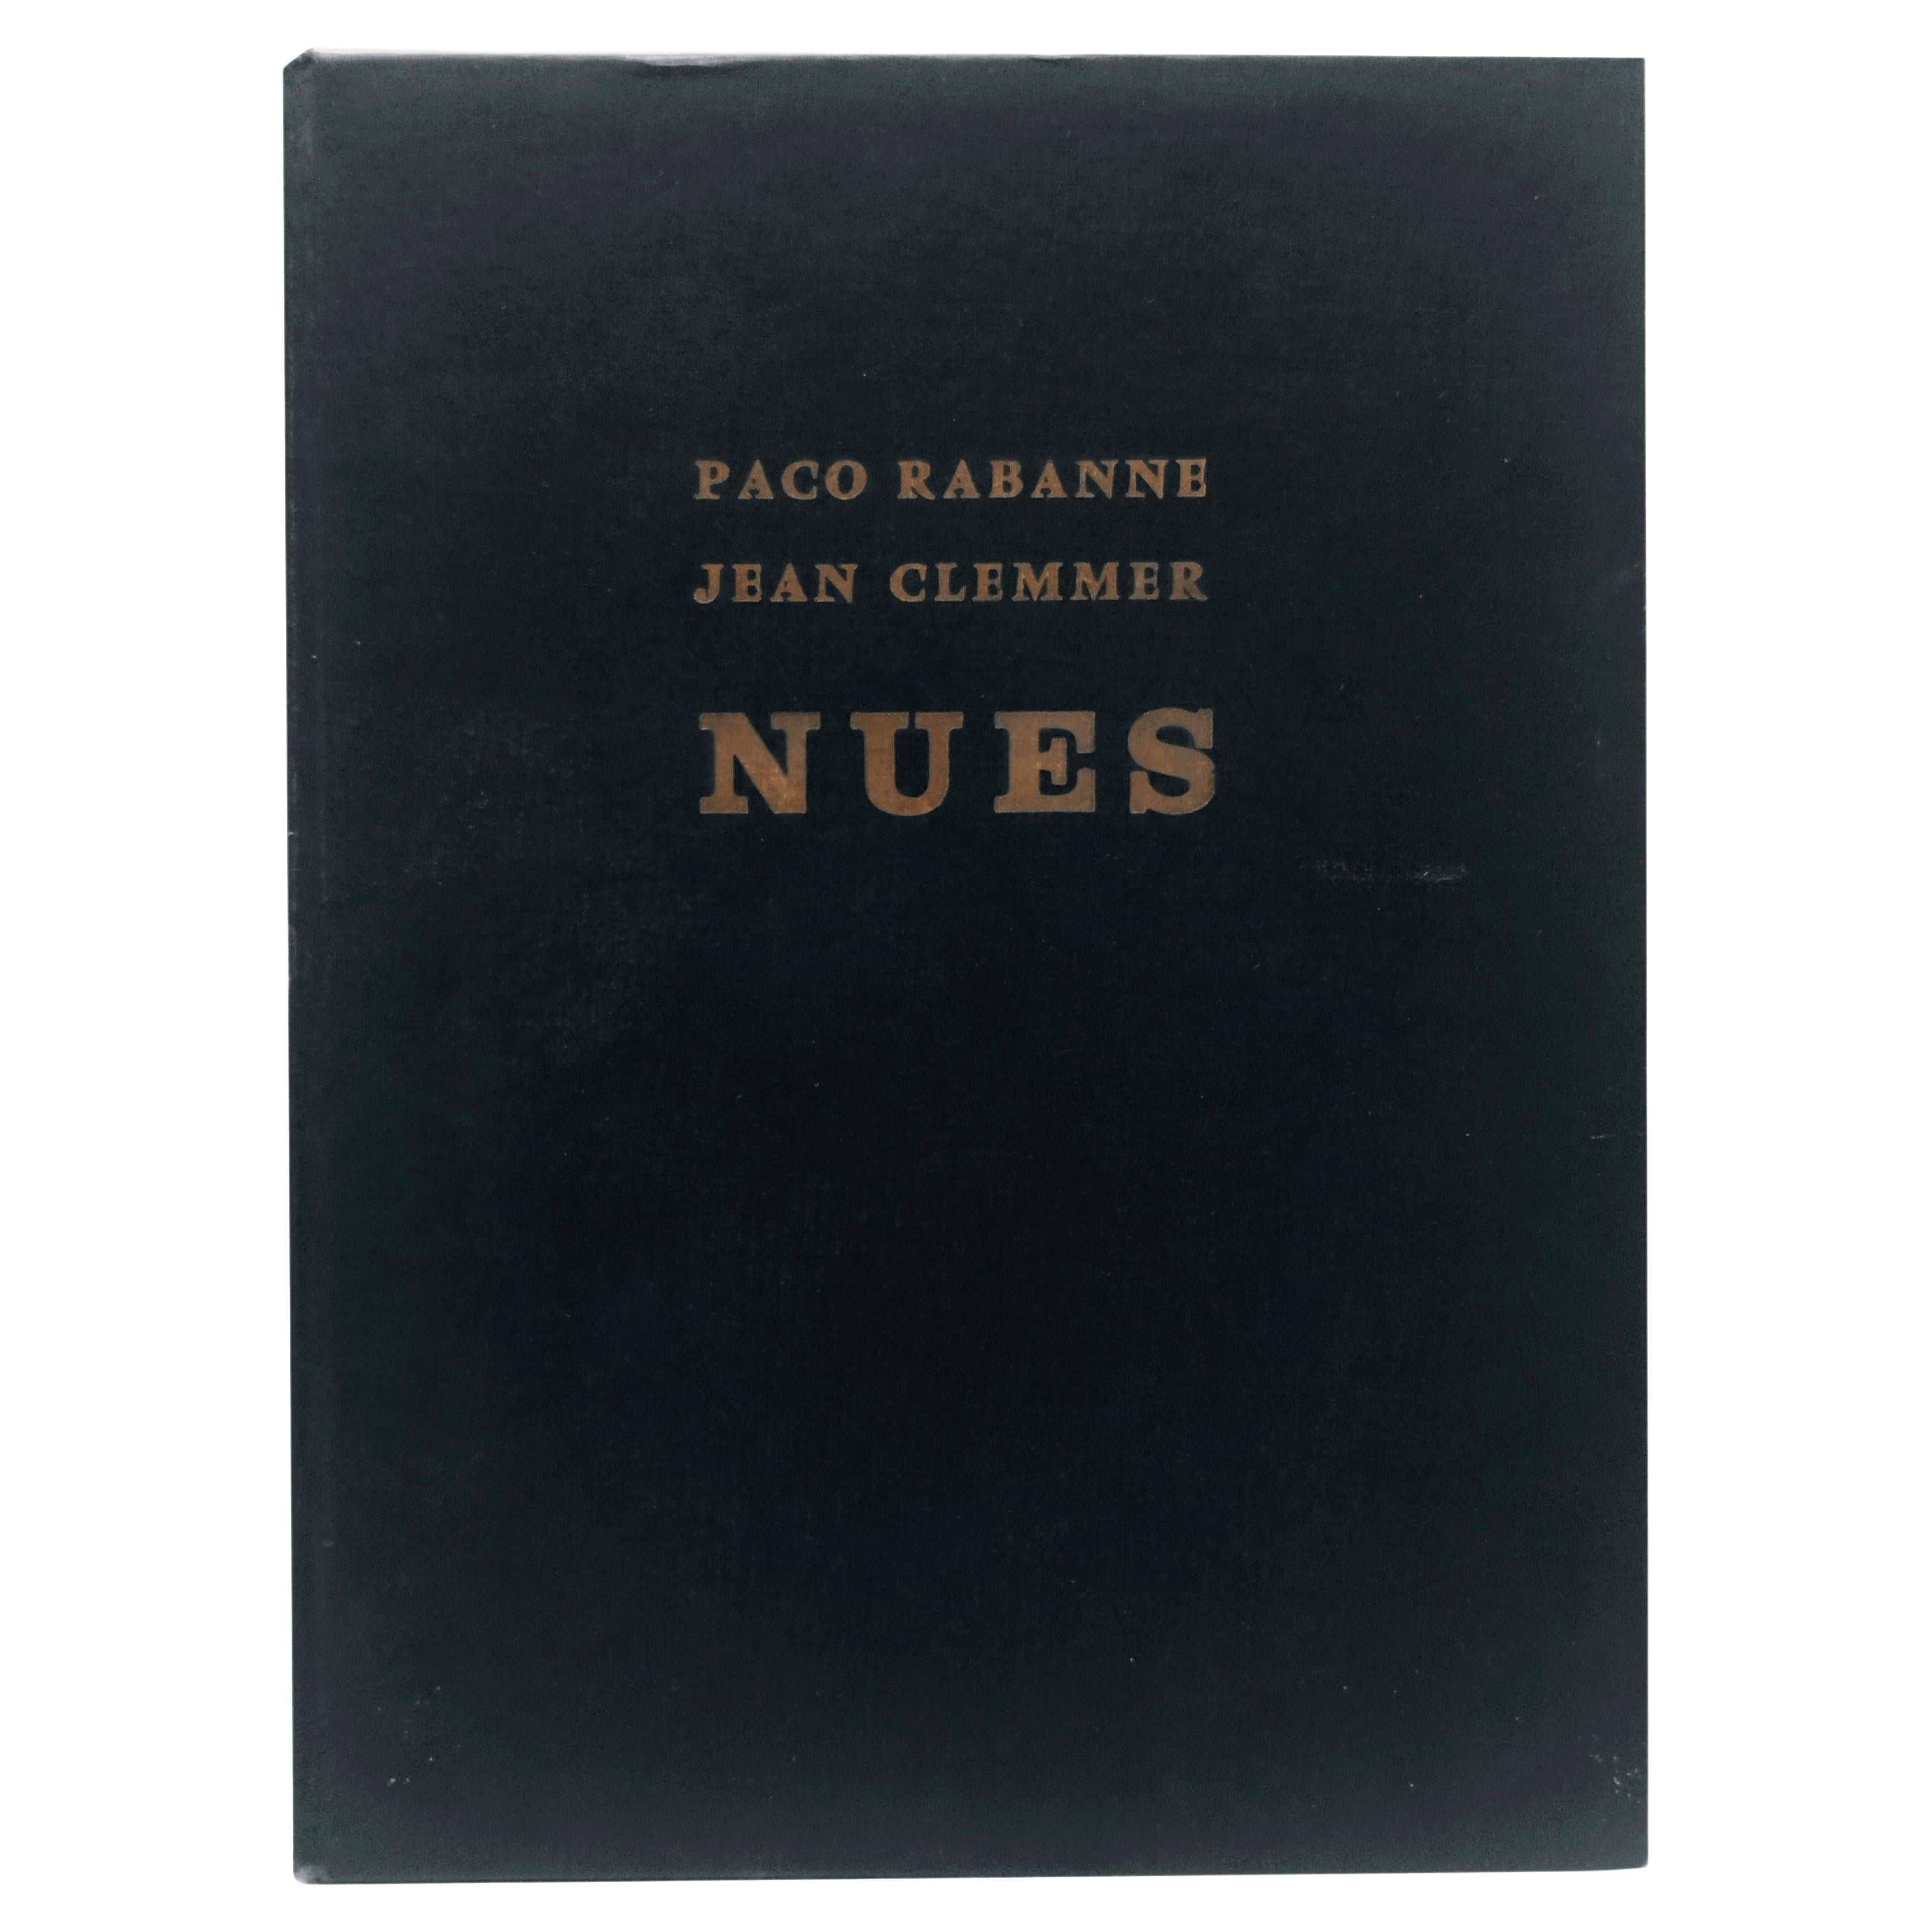 Paco Rabanne & Jean Clemmer "NUES" Book, France 1969 For Sale